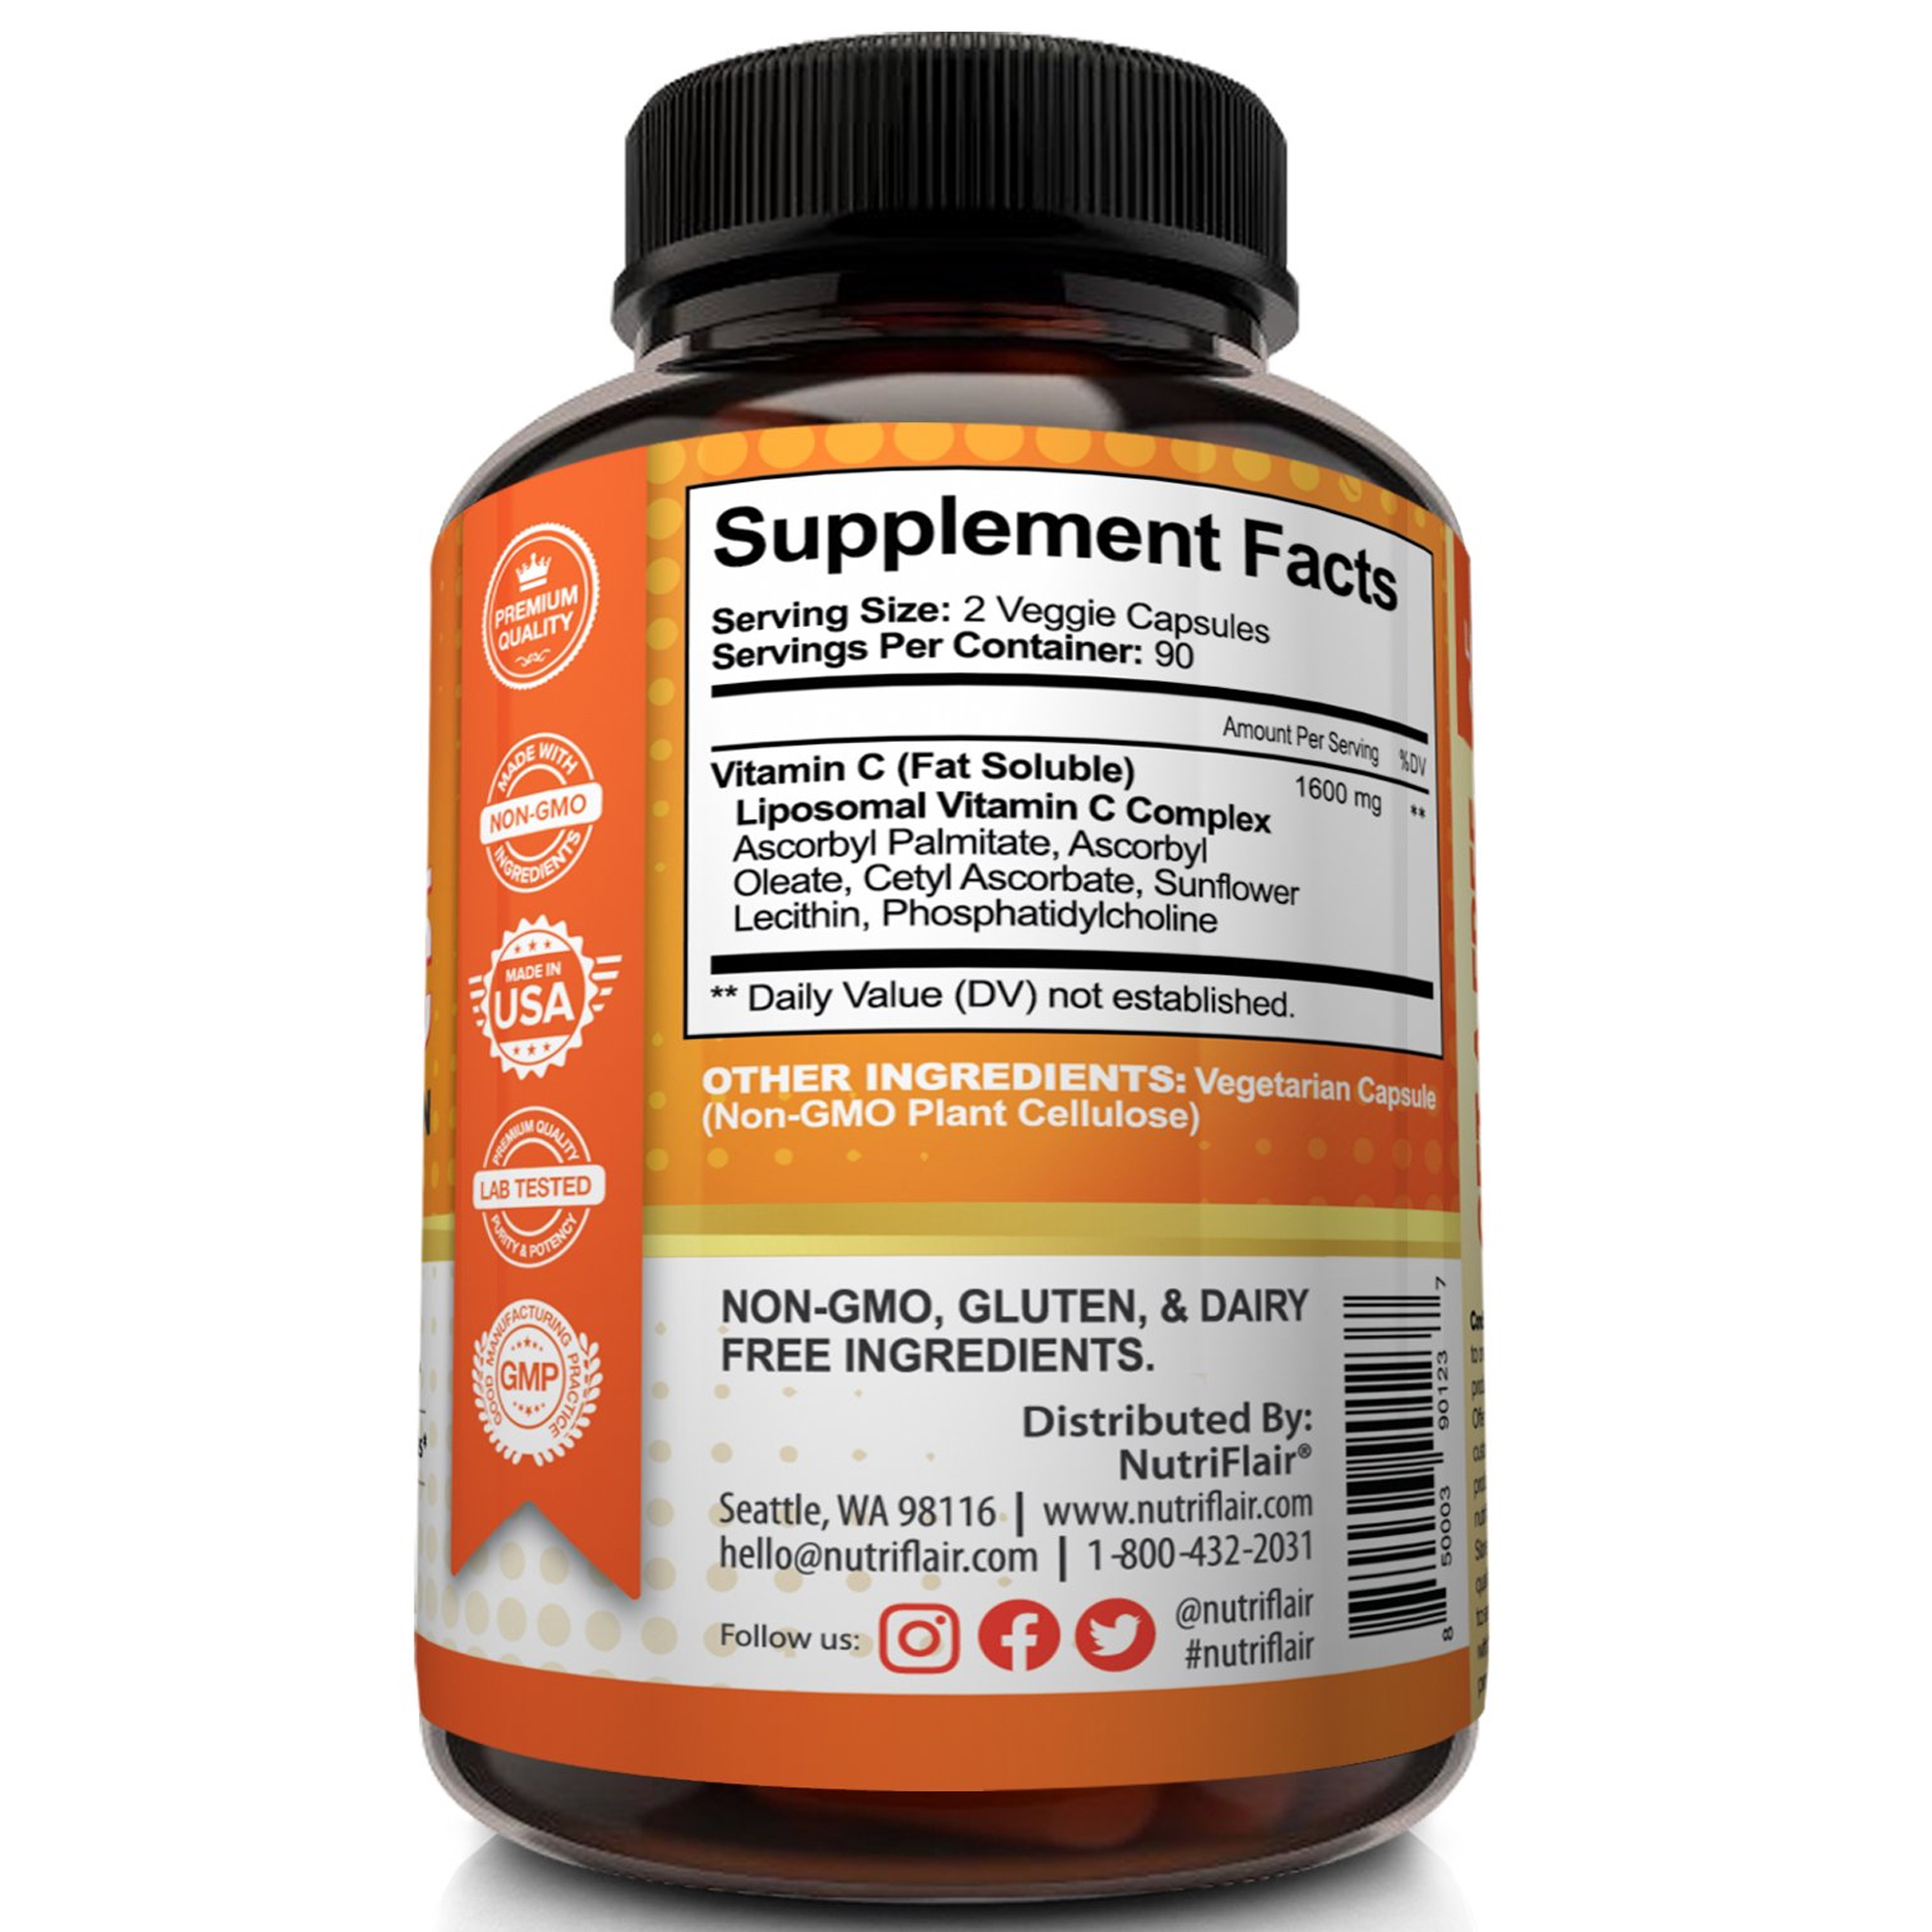 NutriFlair Liposomal Vitamin C 1600mg, 180 Capsules - High Absorption, Fat Soluble VIT C, Antioxidant Supplement, Higher Bioavailability Immune System Support & Collagen Booster, Non-GMO, Vegan Pills - image 5 of 7